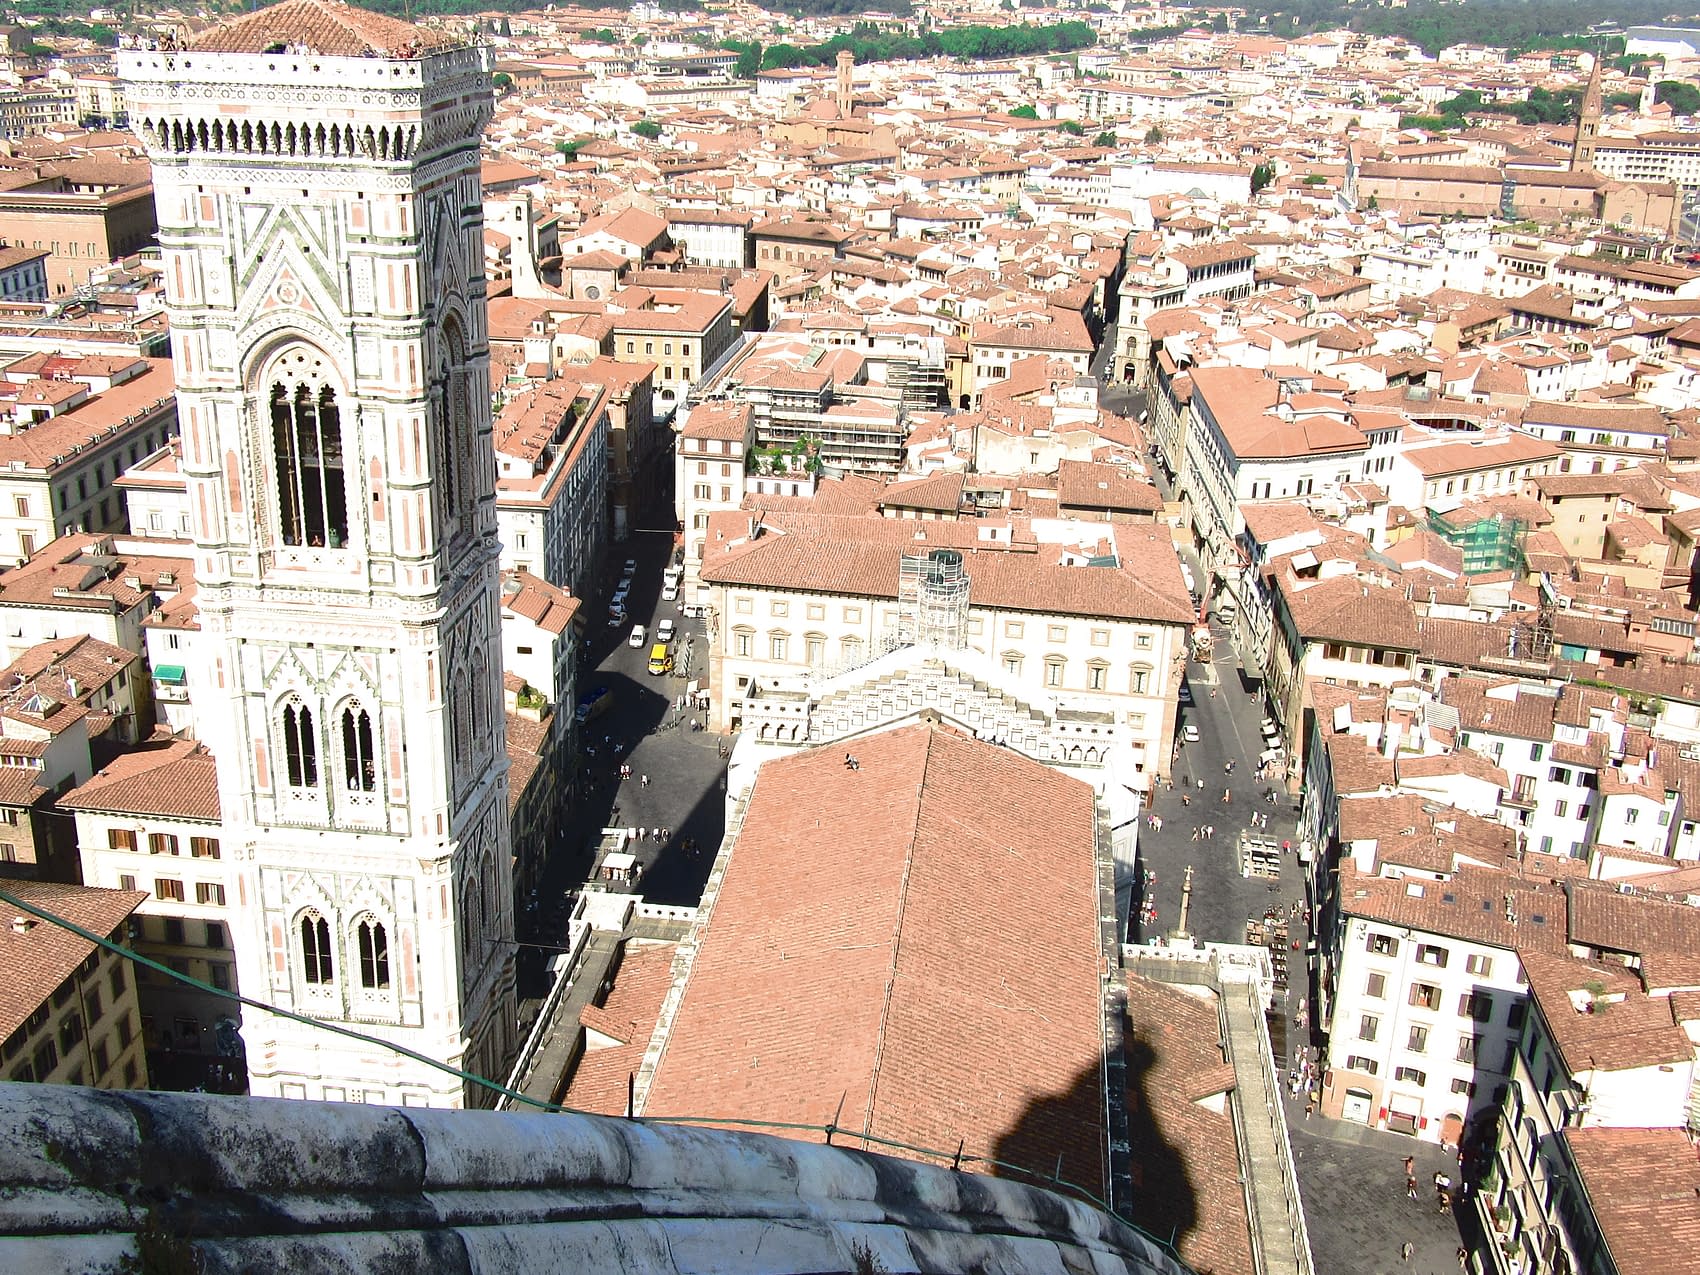 View of the Duomo from the Cupola